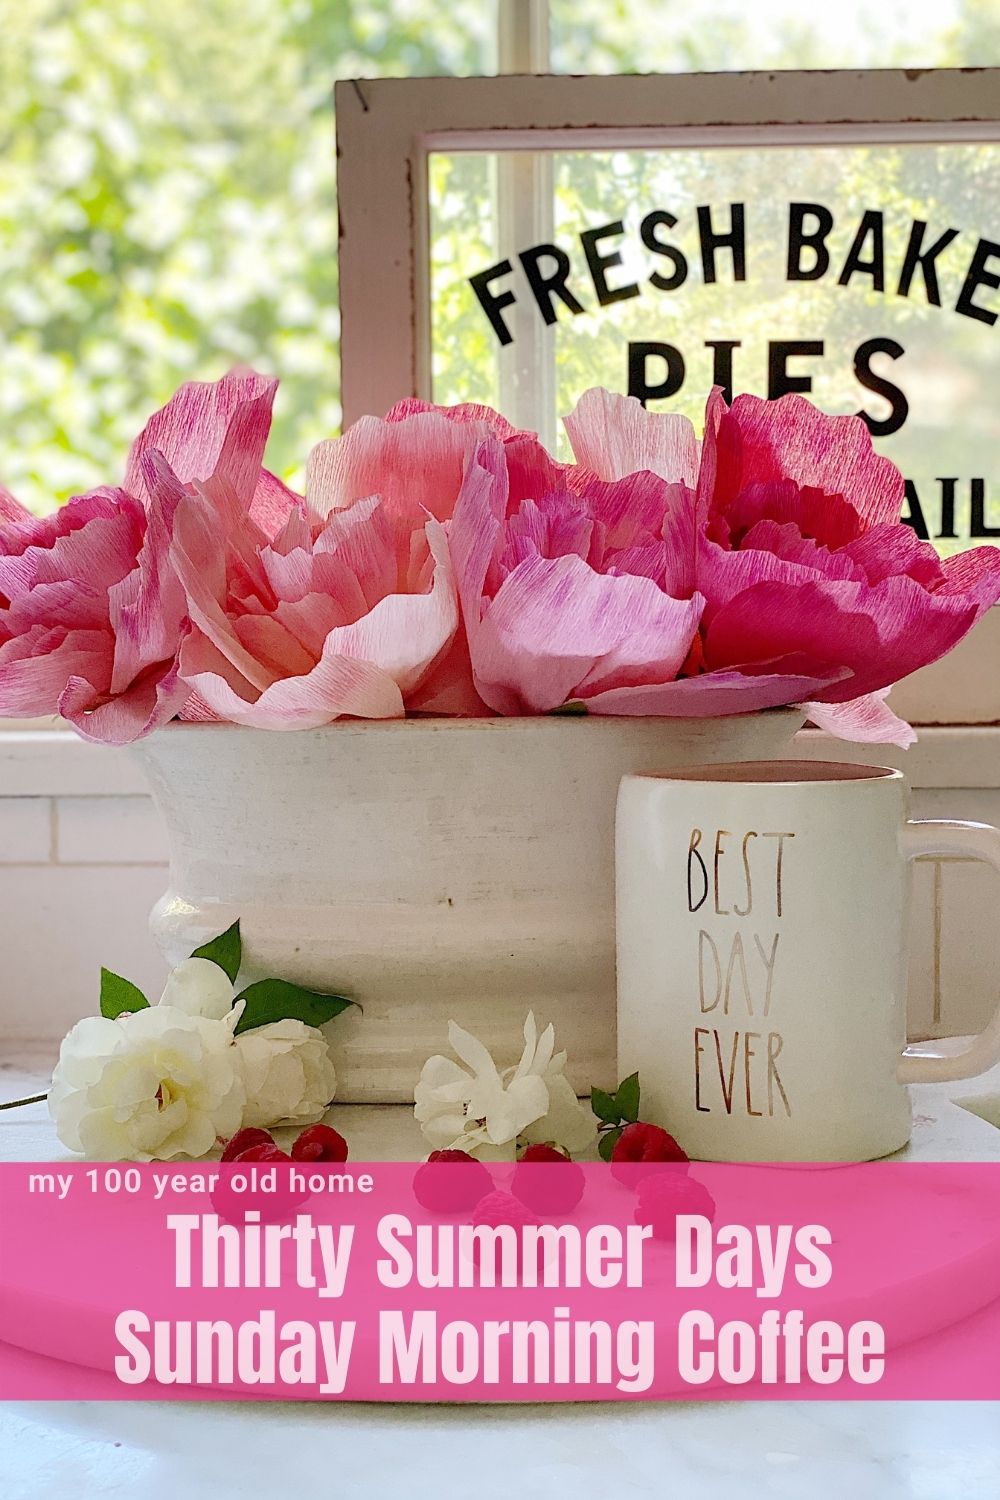 I have a new theme for June and it is Thirty Days of Summer. Every day in June I will be sharing a fun summer idea and celebrating that summer days are the best days ever!